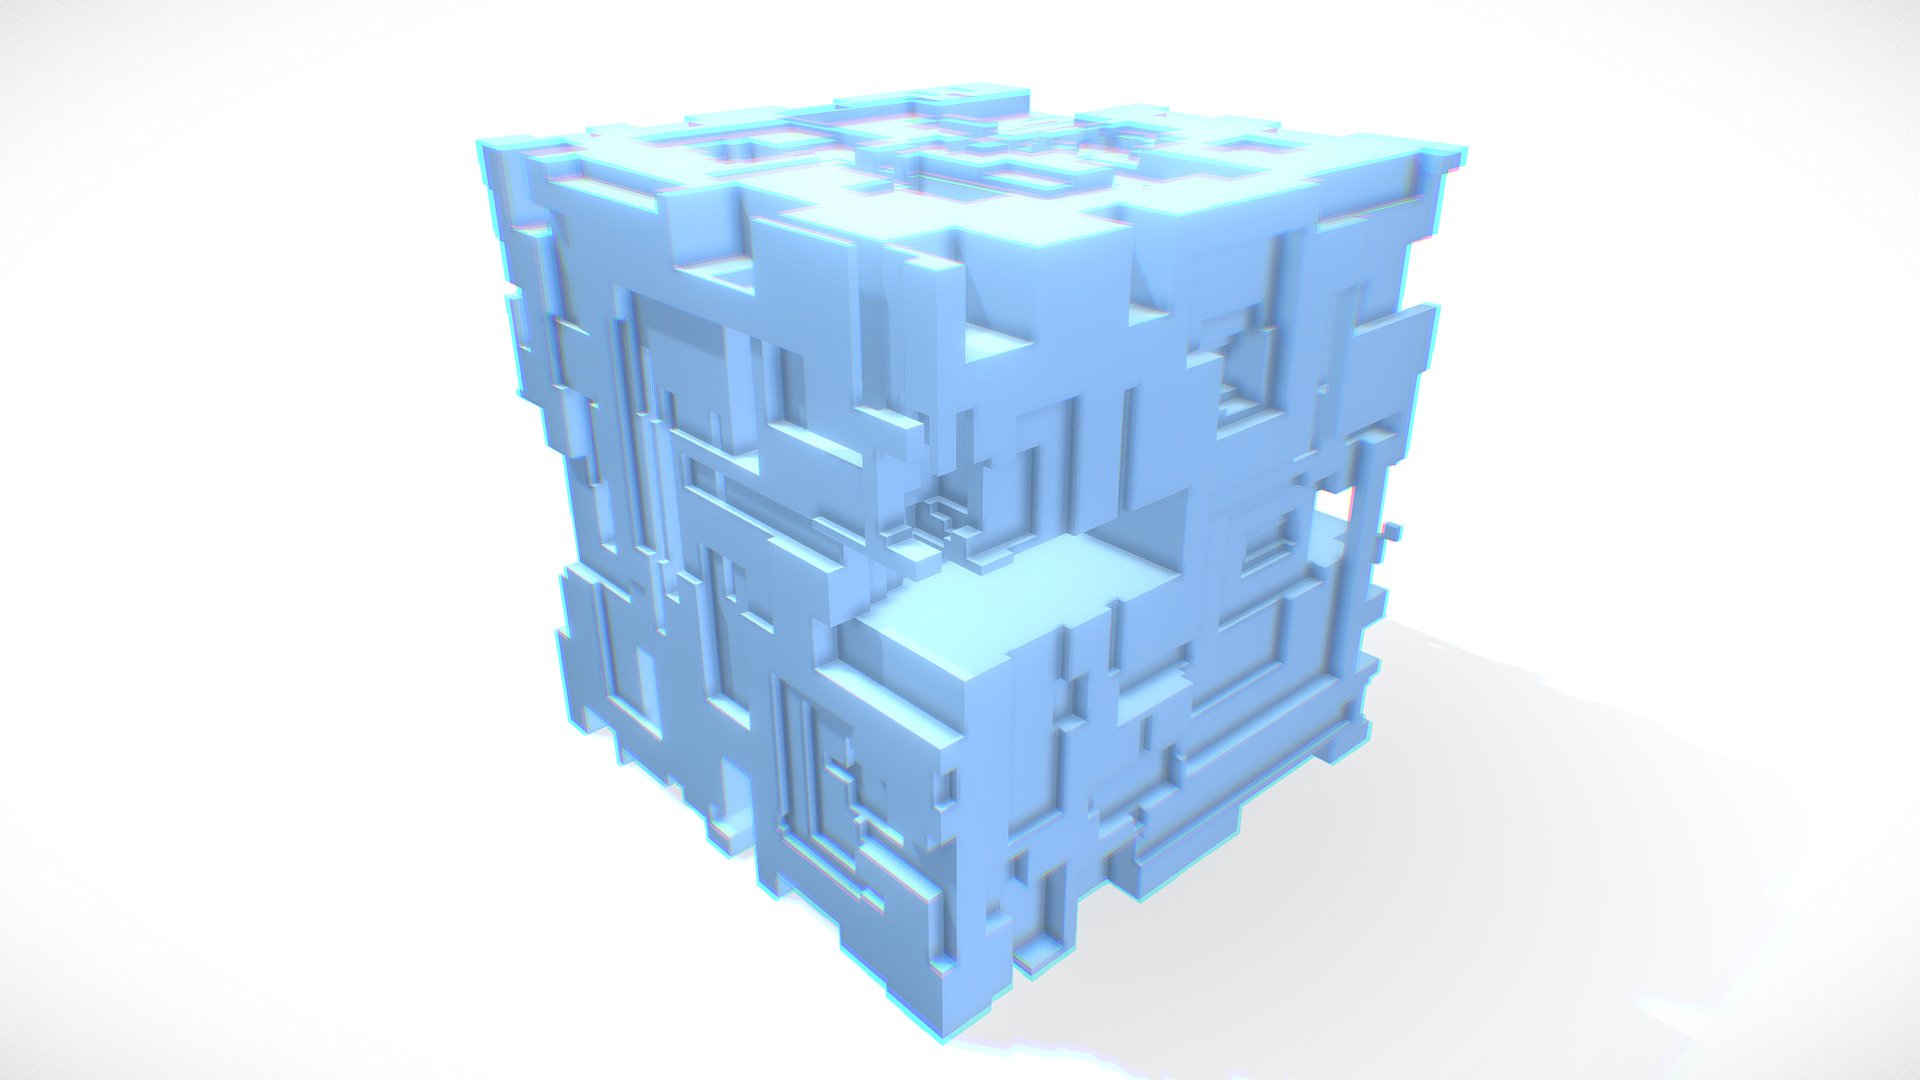 ( If you want custom texture, you can ask me and I post new model with your request so you can buy it )

About the content:

No textures
Quad Mesh 

by Lucid Dreams visuals

www.luciddreamsvisuals.com.ar - Voxel Cube - Placeholder - Buy Royalty Free 3D model by Lucid Dreams (@lucid_dreams_visuals) 3d model